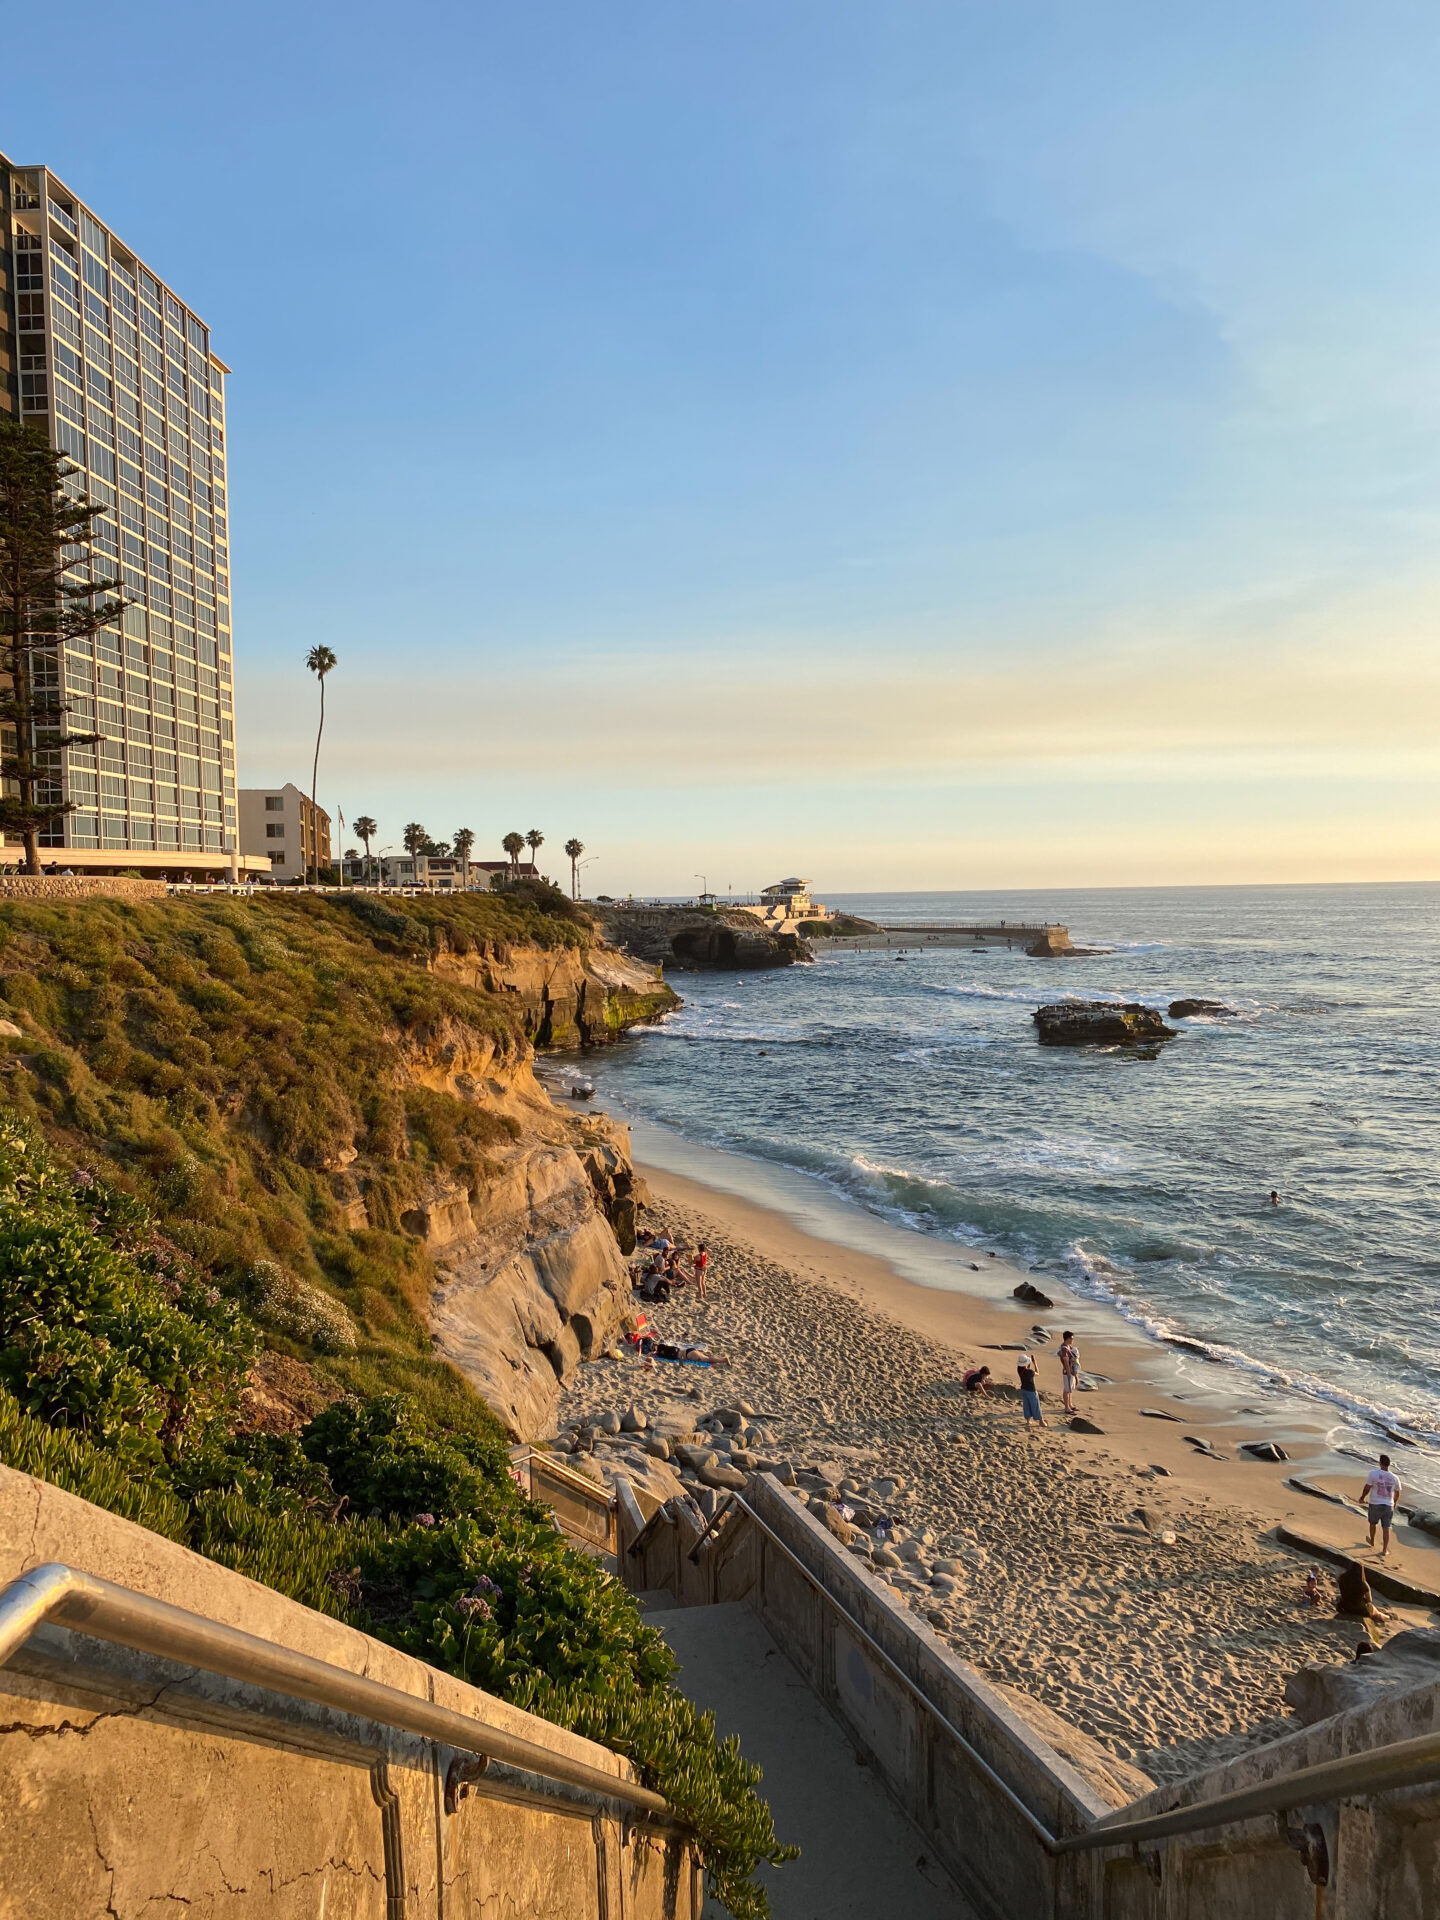 How to spend one day in San Diego itinerary - Palm Trees and Pellegrino San Diego and California travel tips - La Jolla cove beach view at sunset